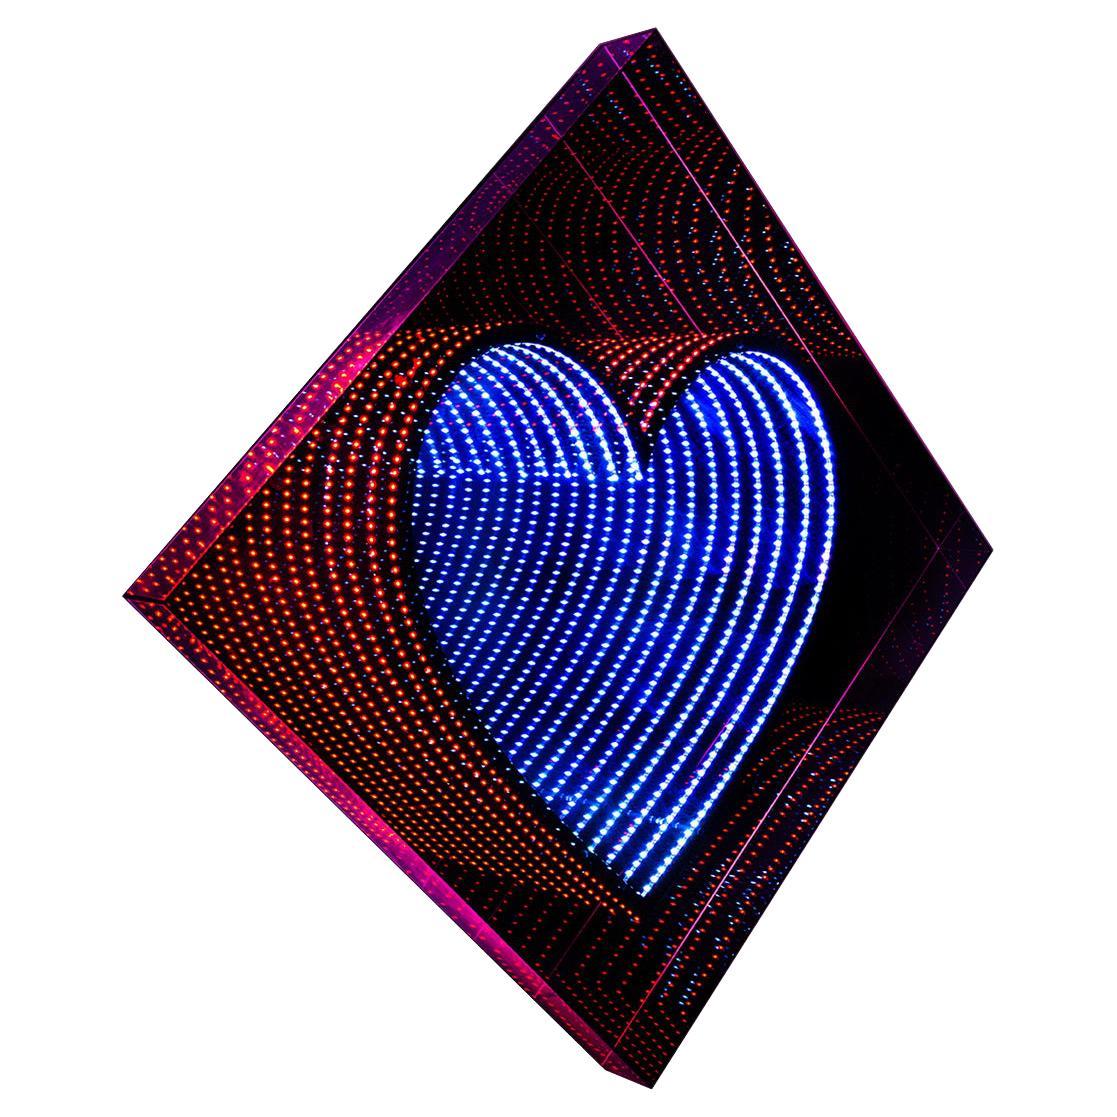 Heart Light Mirror Wall Decoration For Sale